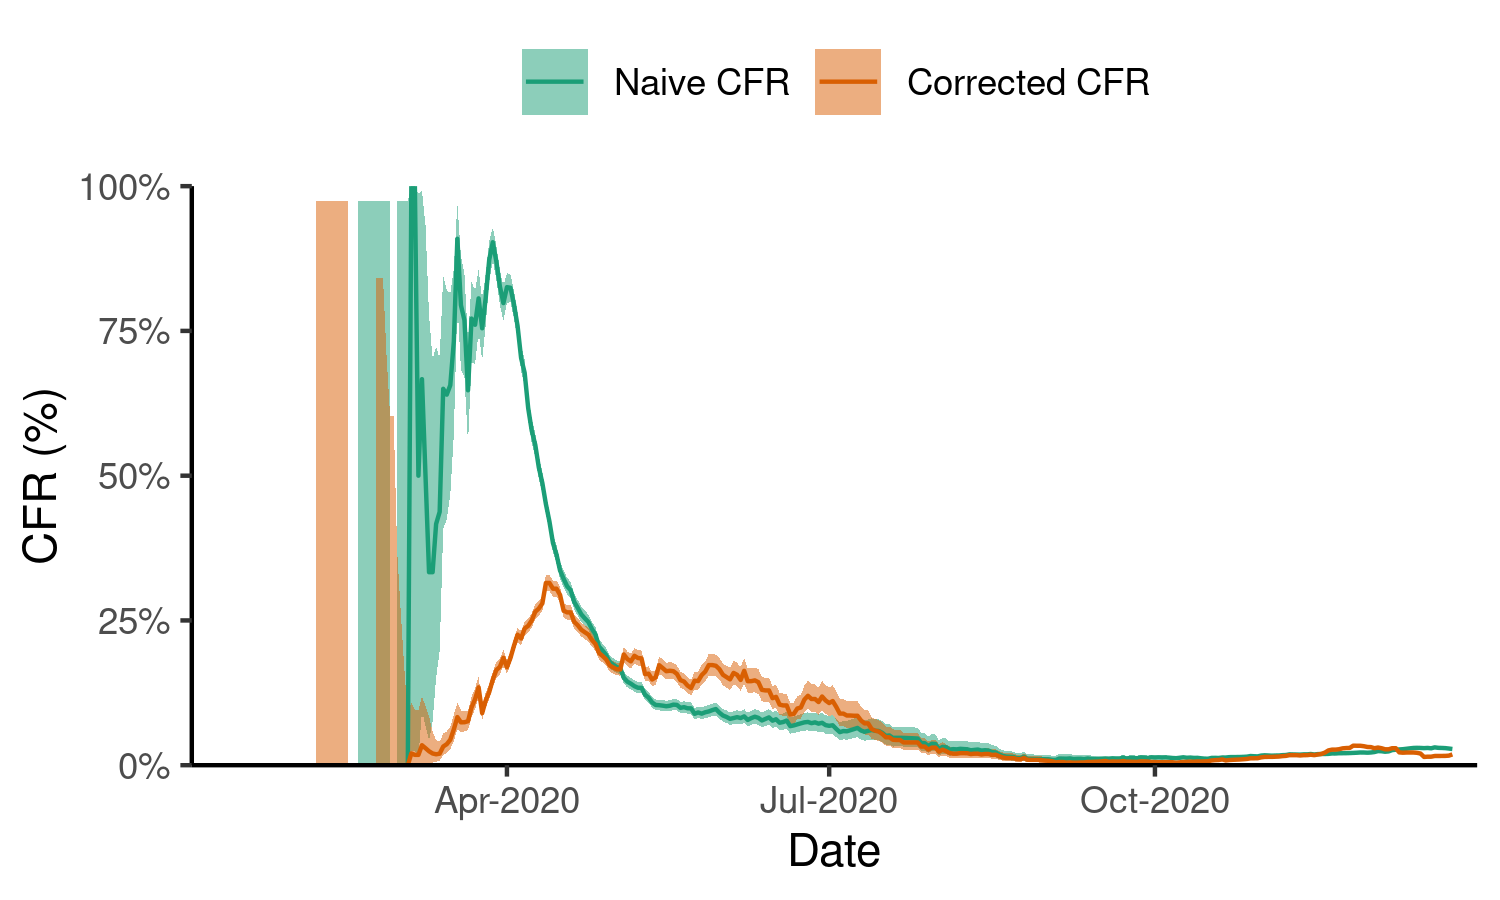 Example plot of the naive time-varying CFR. We calculate the time-varying CFR for the Covid-19 pandemic in the U.K., uncorrected for delays. The red line shows the CFR estimate while the shaded grey region shows the lower and upper limits of the estimate as 95% confidence intervals.